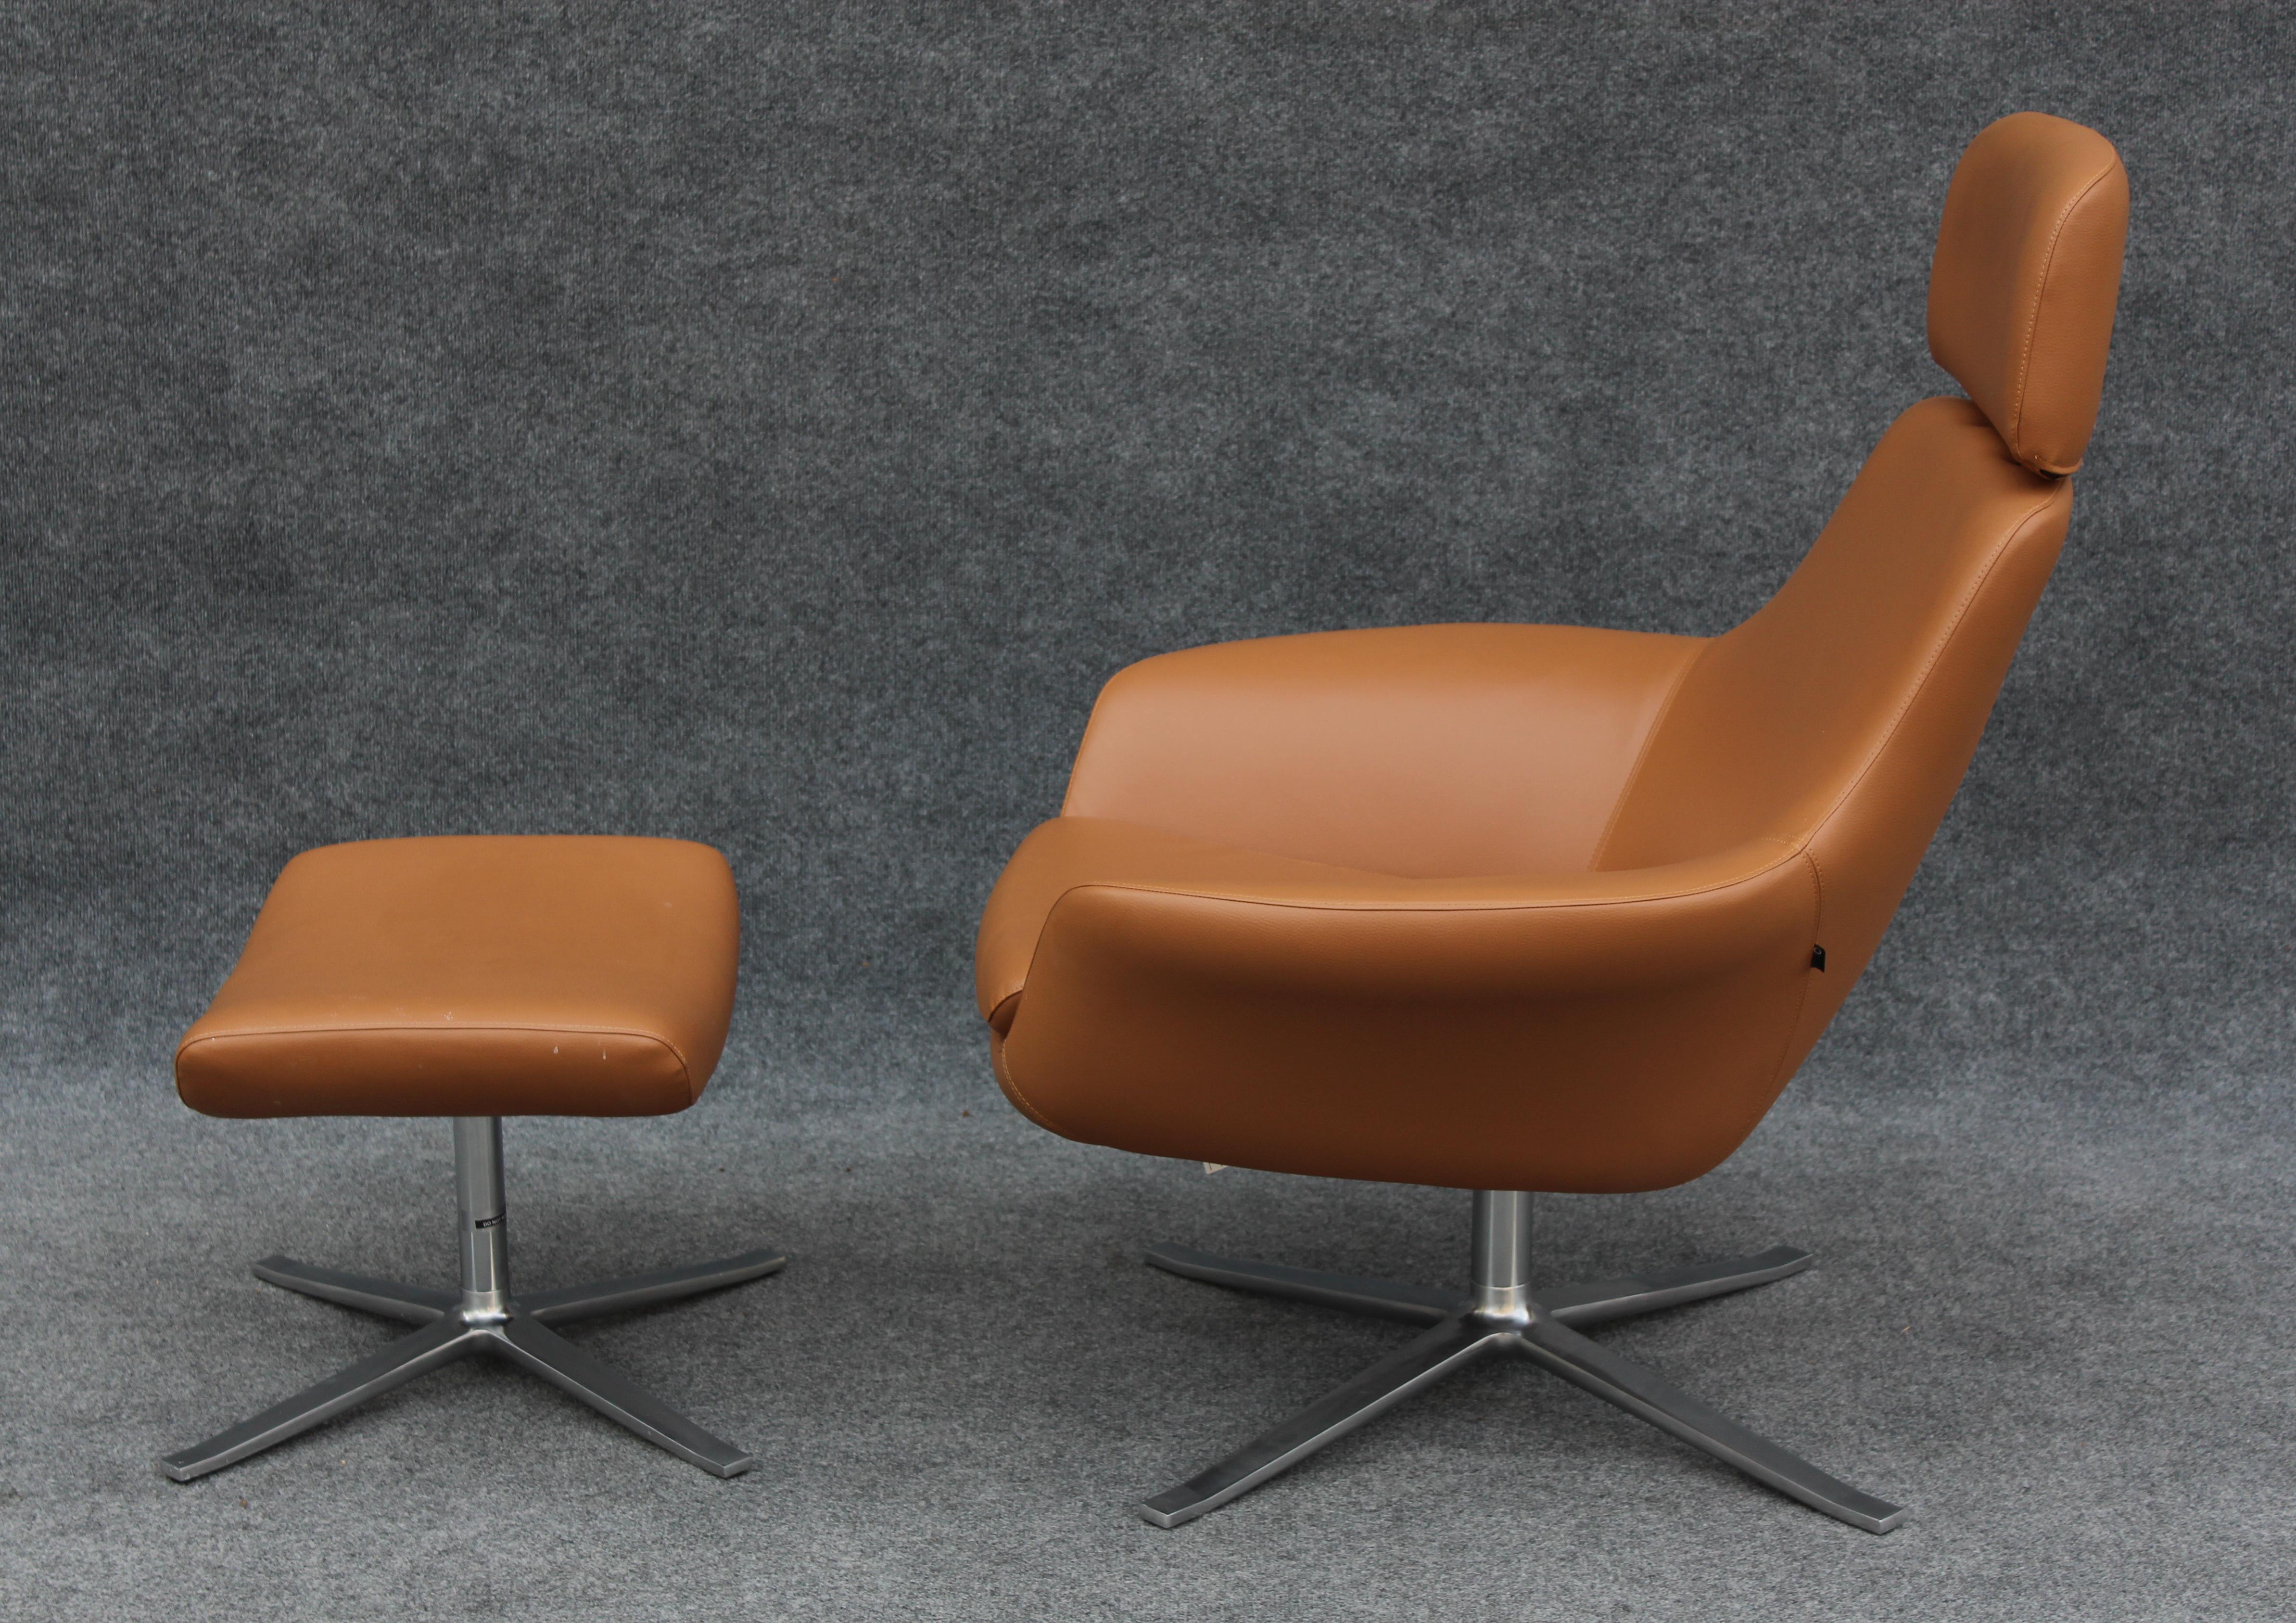 Designed by Pearson Lloyd, this great chair was manufactured by Steelcase under the Coalesse name, which has defined itself for its futuristic furniture and excellent production quality. Its tan color is not currently on sale by Steelcase or